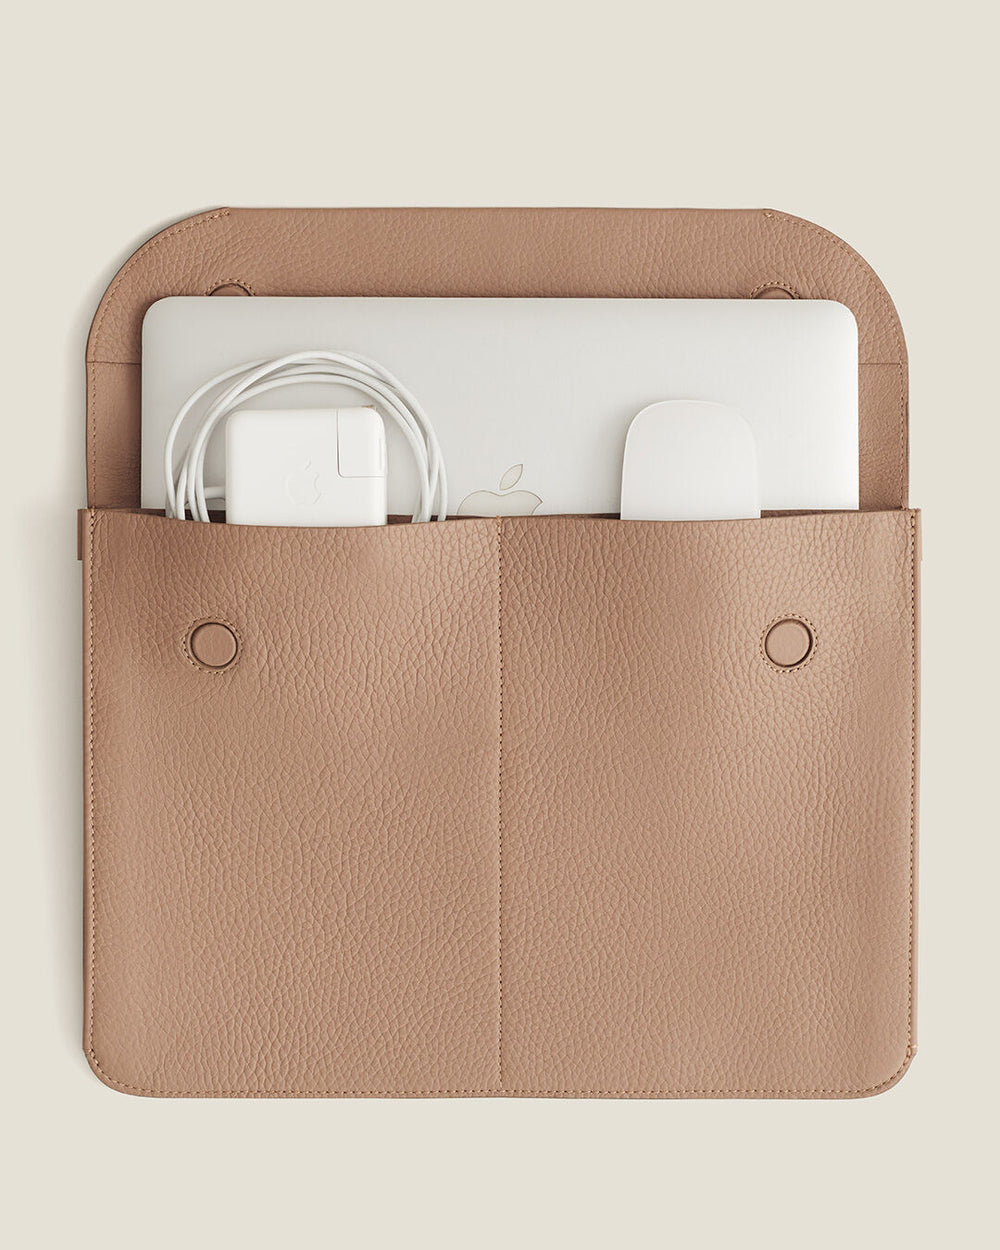 Laptop and accessories in an organizer pouch